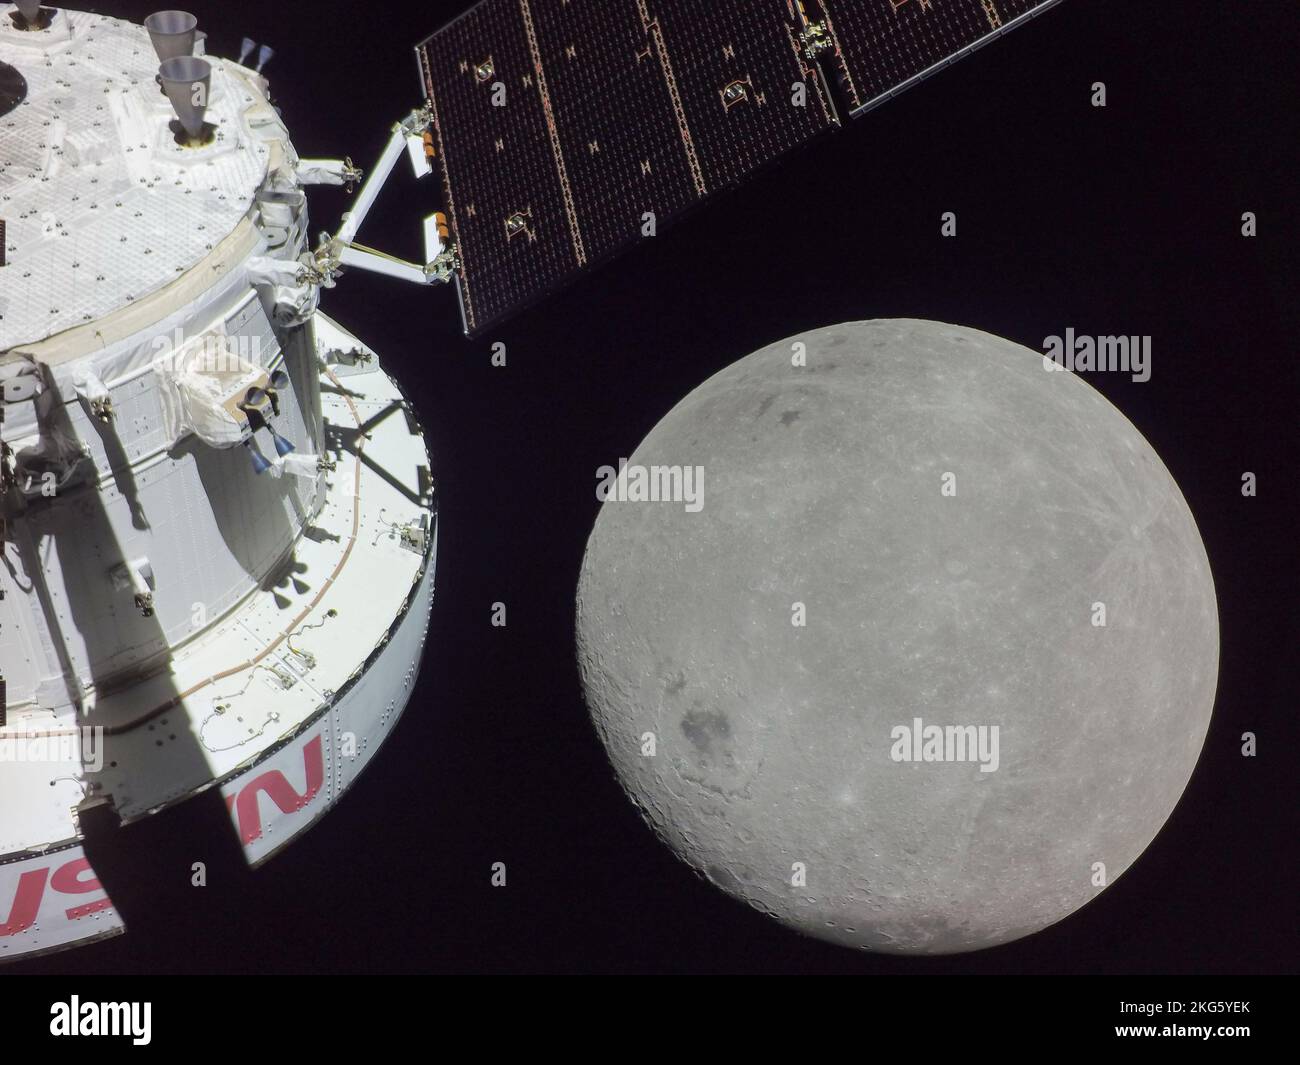 21 November, 2022. A portion of the far side of the Moon looms large just beyond the Orion spacecraft in this image taken on November 21, 2022, the sixth day of the Artemis I mission by a camera on the tip of one of Orion's solar arrays. The spacecraft entered the lunar sphere of influence Sunday, November 20, making the Moon instead of Earth the main gravitational force acting on the spacecraft. Credit: UPI/Alamy Live News Stock Photo